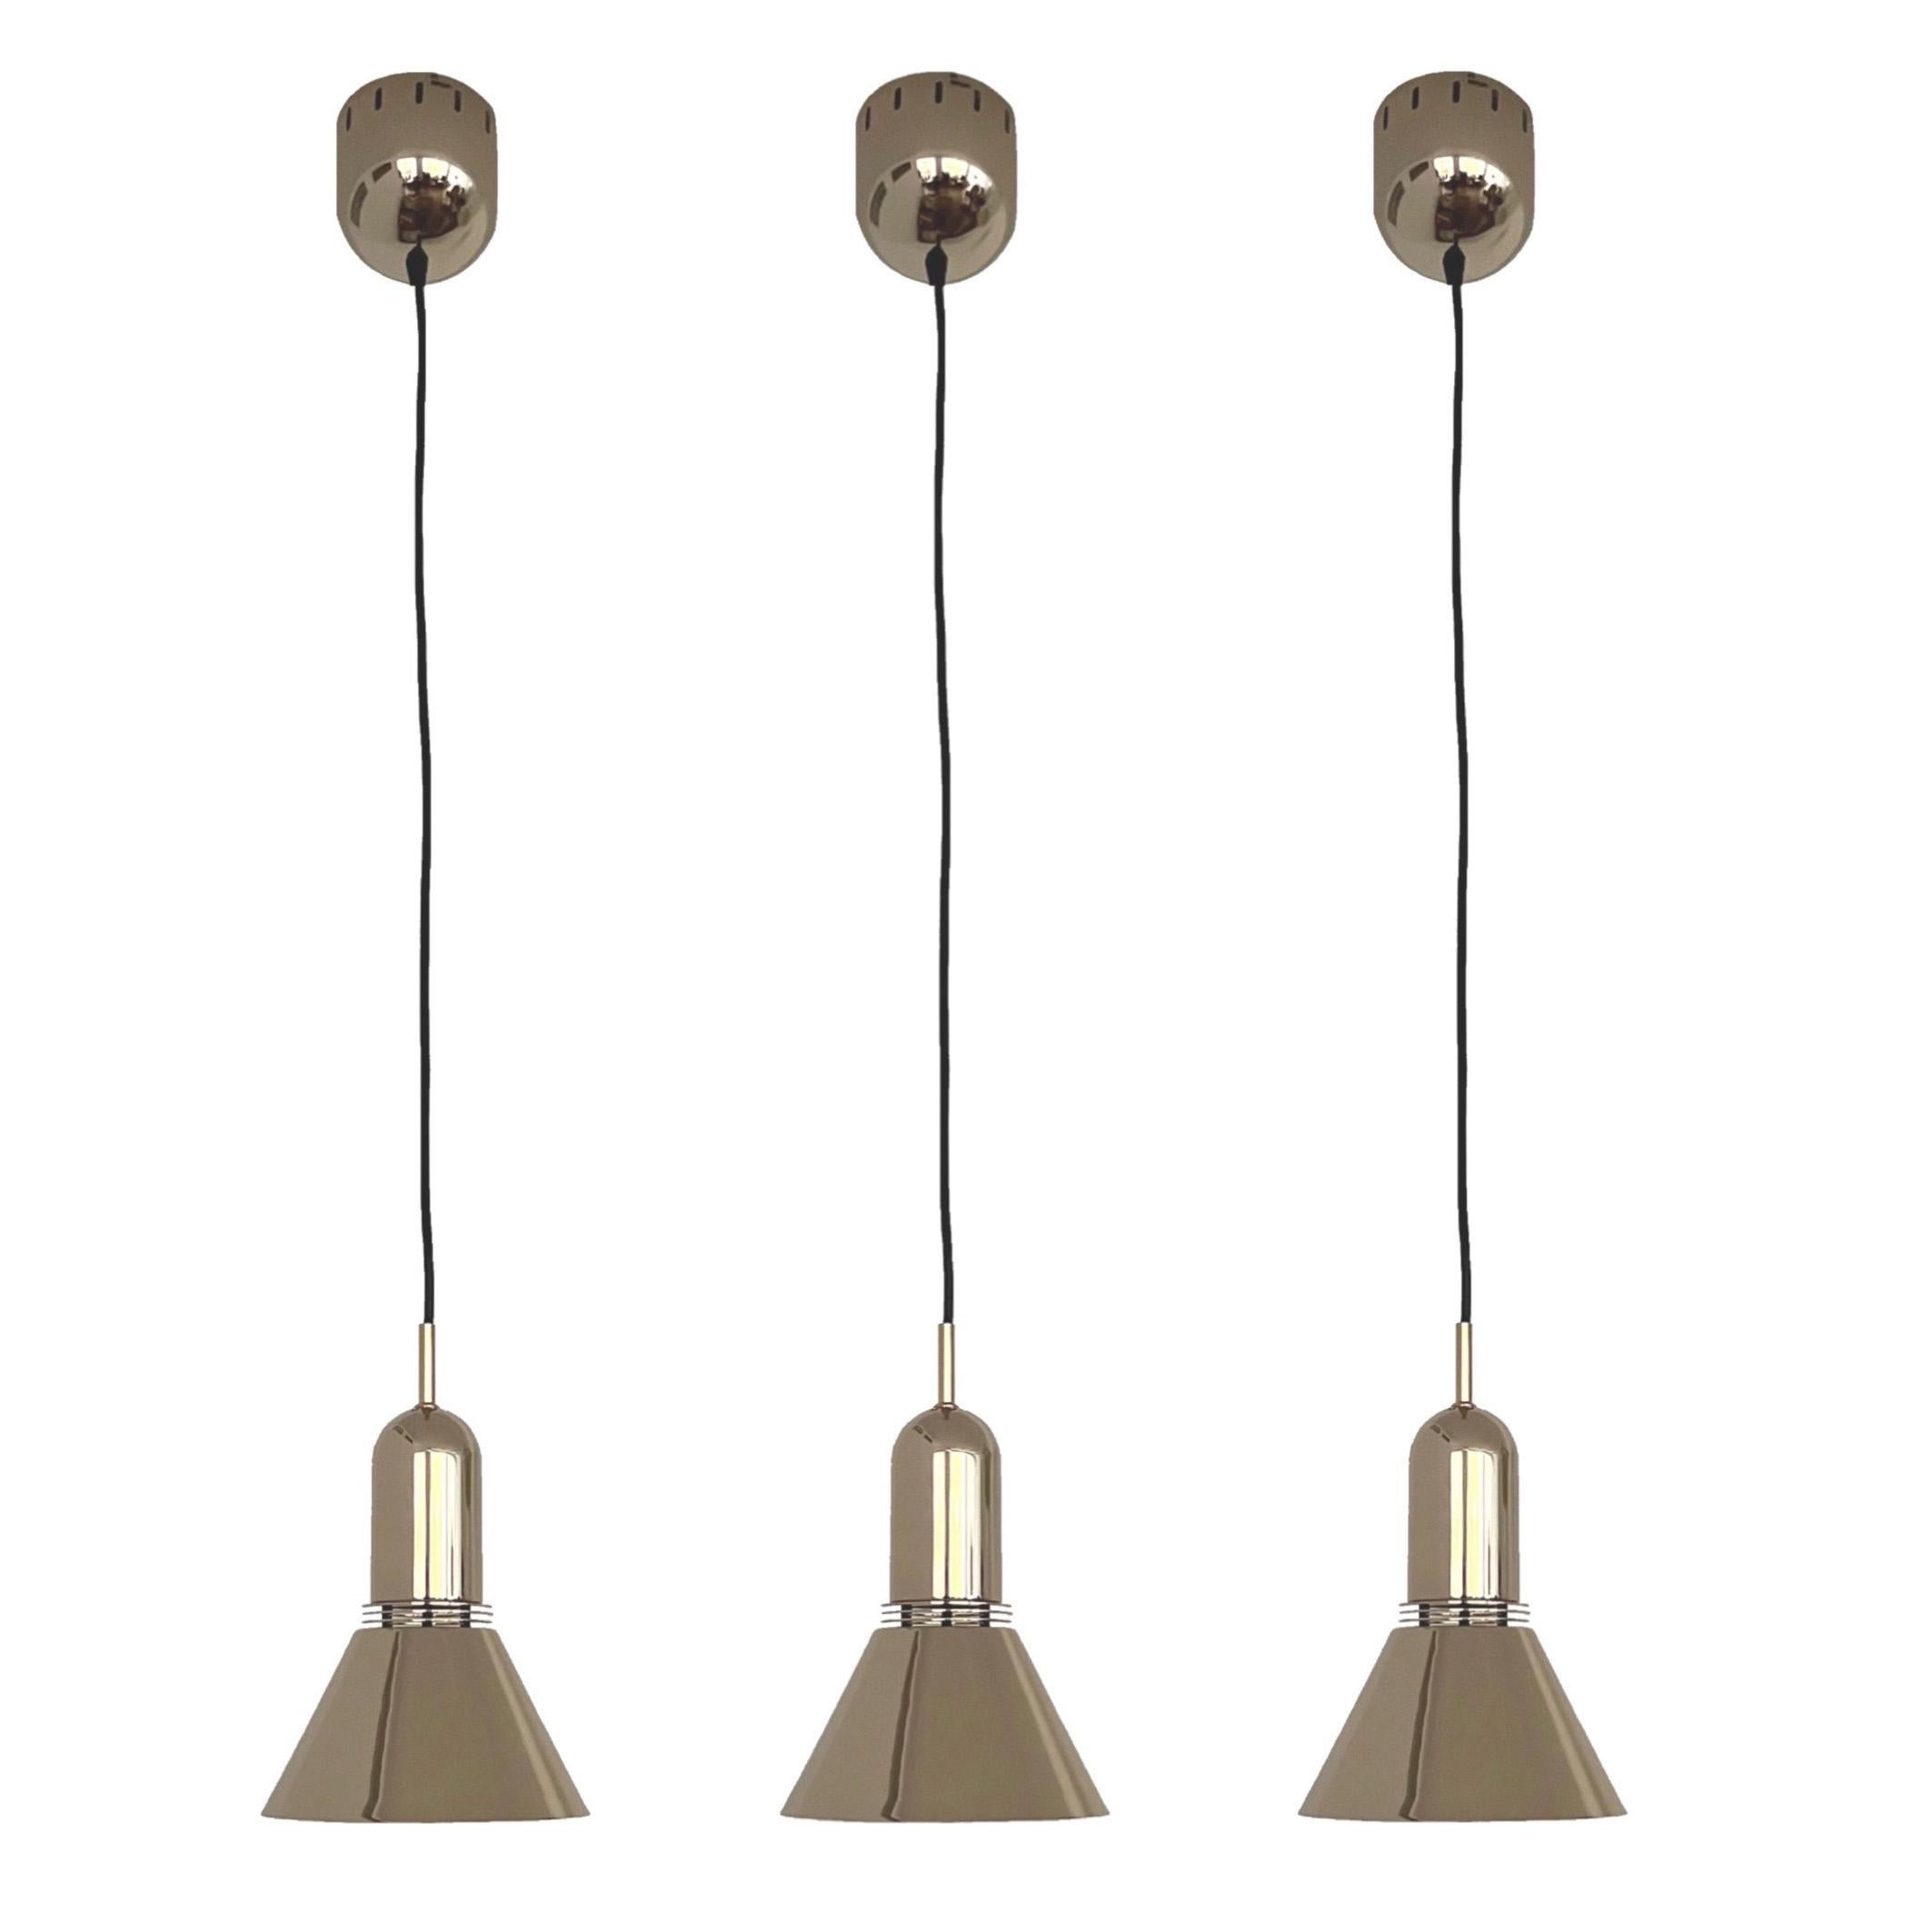 This Set has never been used, perfect condition, included original carton box. This Marvelous Mid-Century Set is composed by:
- Three of Gold Long Chandeliers by Estiluz. Model: T-1142. Dimension:
H 155 cm x D 18 cm (H 61.02 in. x D 9.45 in.).
- Two